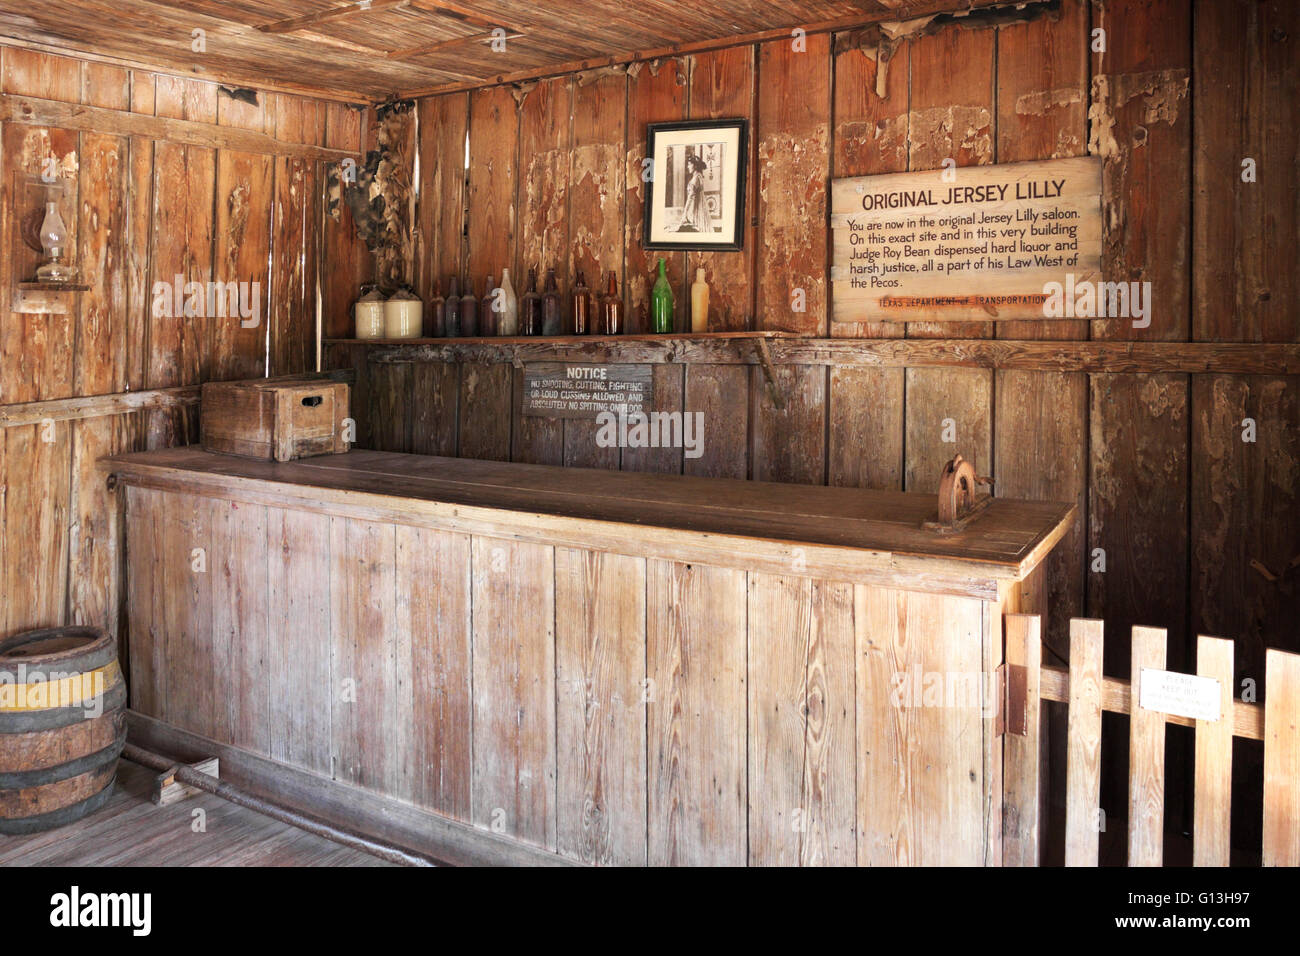 The Jersey Lilly, famed courthouse and bar owned by Judge Roy Bean, "The Law West of the Pecos." This is the bar where the judge Stock Photo